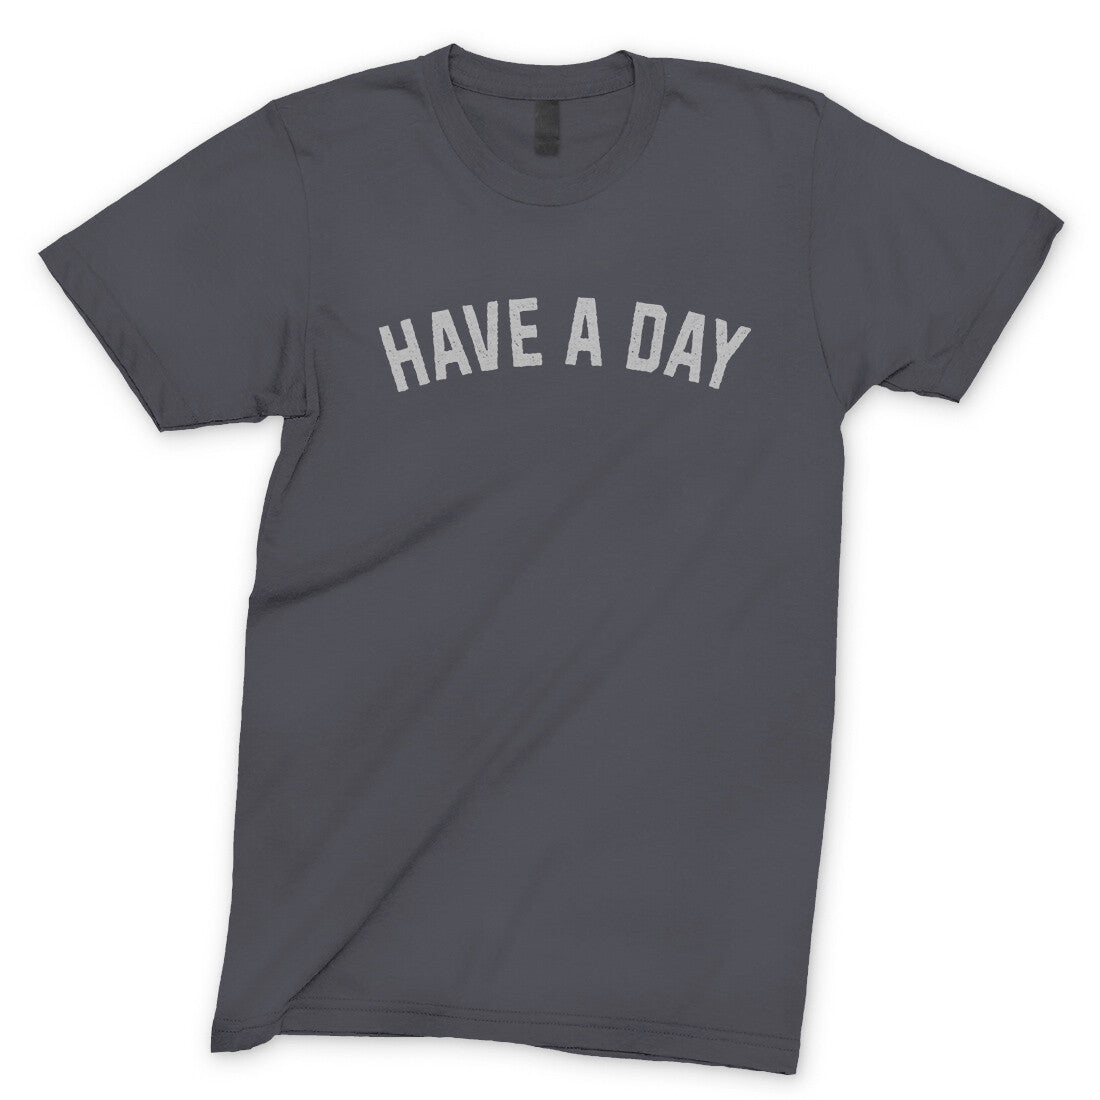 Have a Day in Charcoal Color